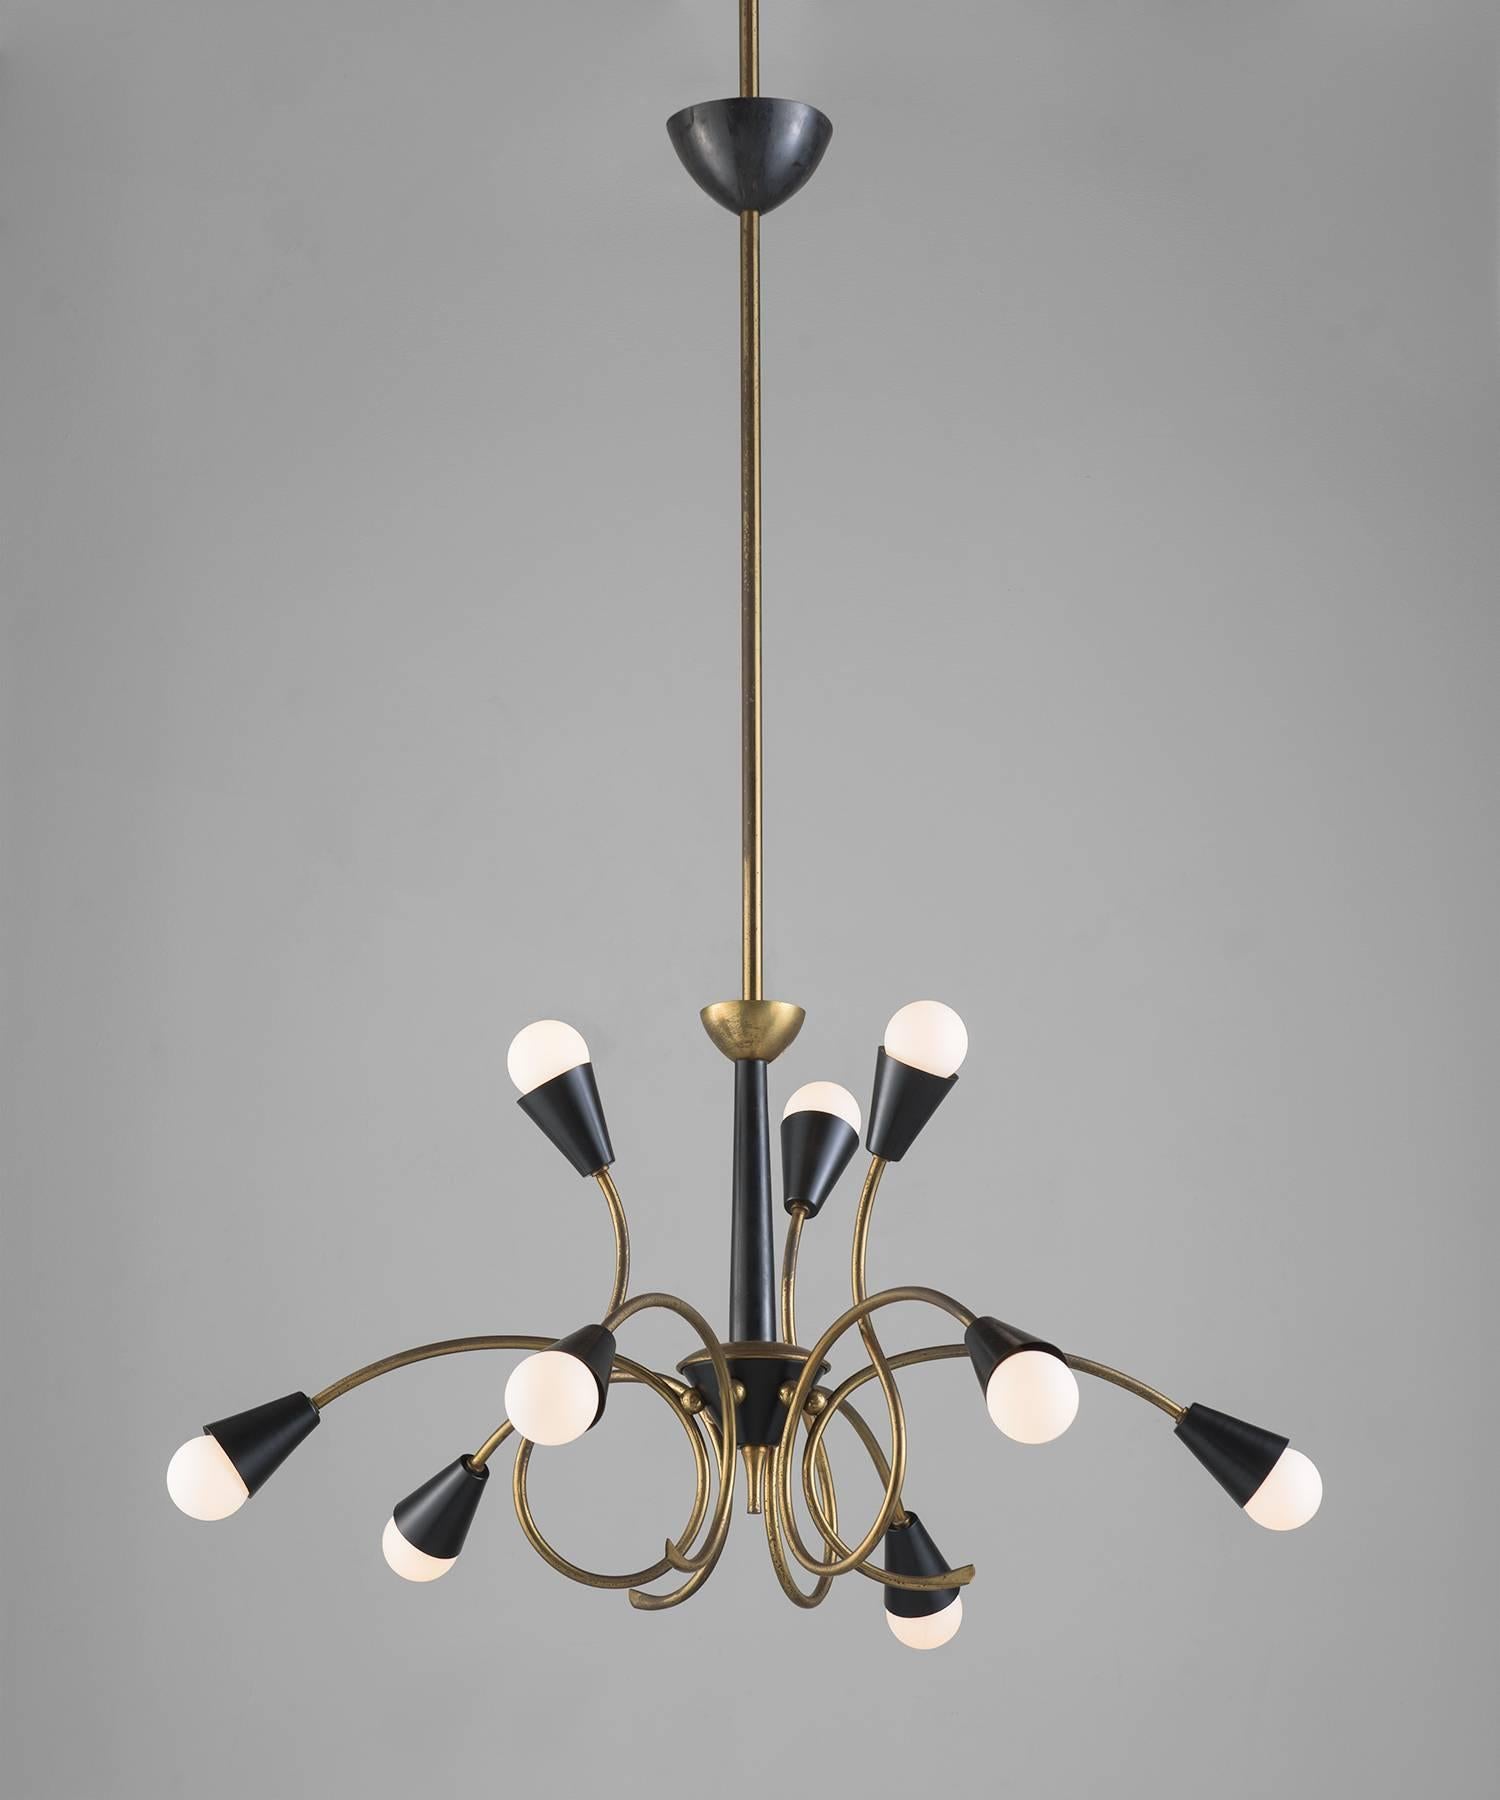 Brass and black metal modernist chandelier, circa 1960.

Nine globe Italian chandelier with alternating upward and downward looping arms.
 